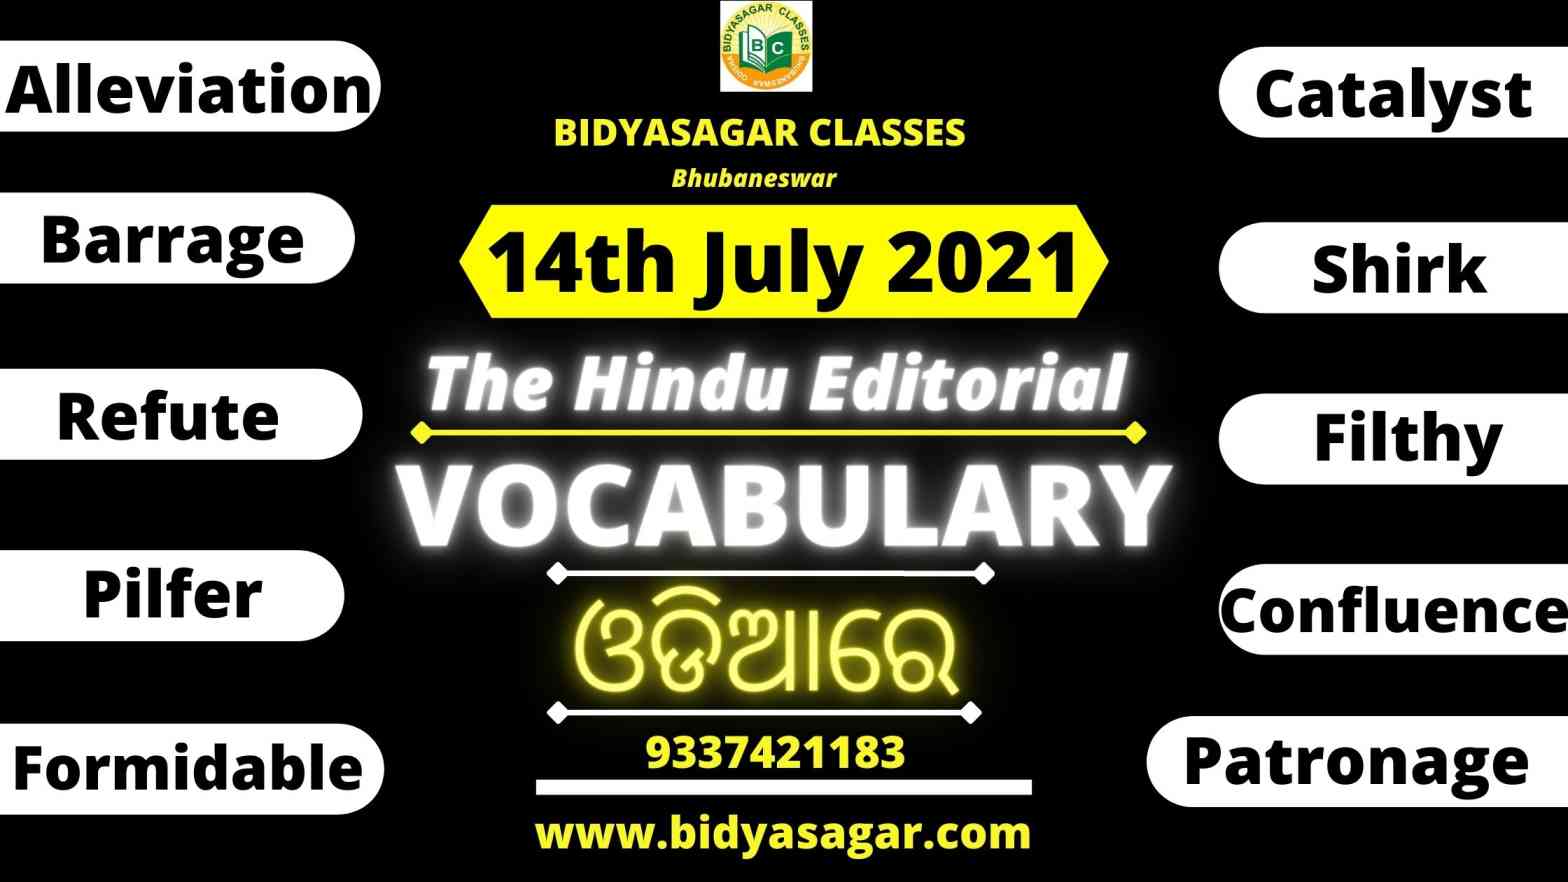 The Hindu Editorial Vocabulary of 14th July 2021